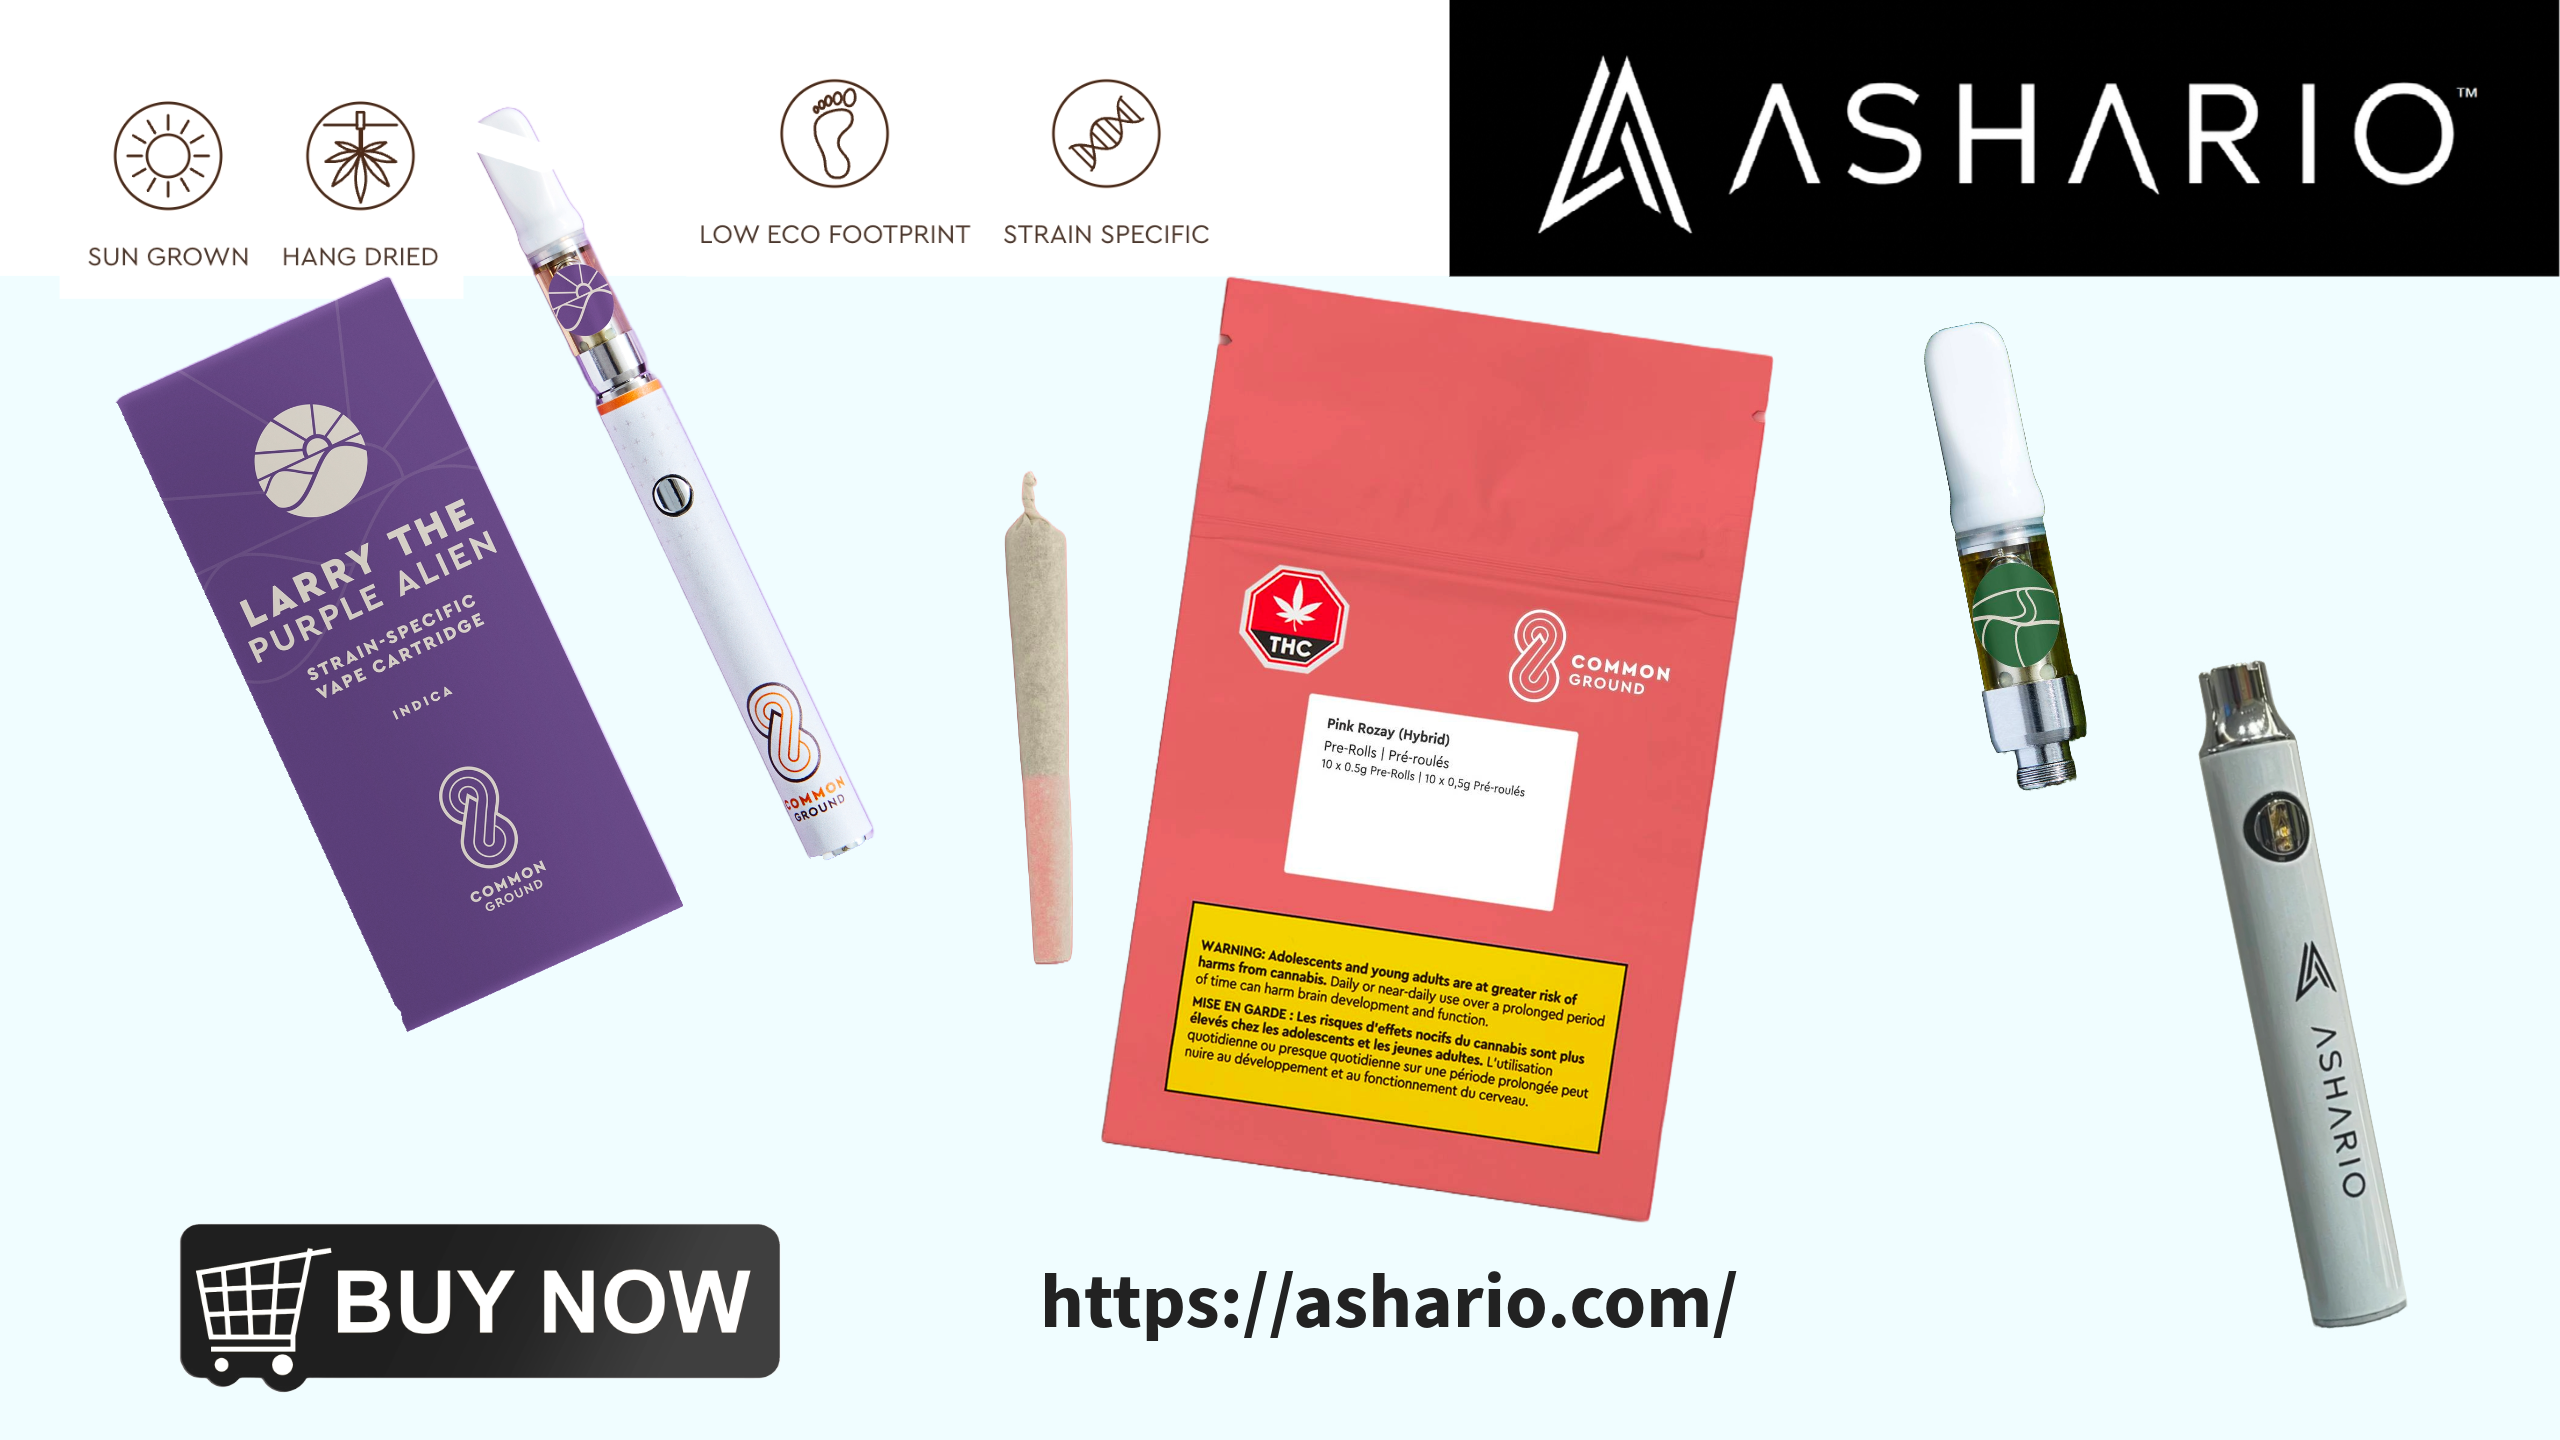 Uncover a realm of excellence with Common Ground, celebrated as the pinnacle of recreational cannabis stores in Canada and proudly featured at Ashario Cannabis.